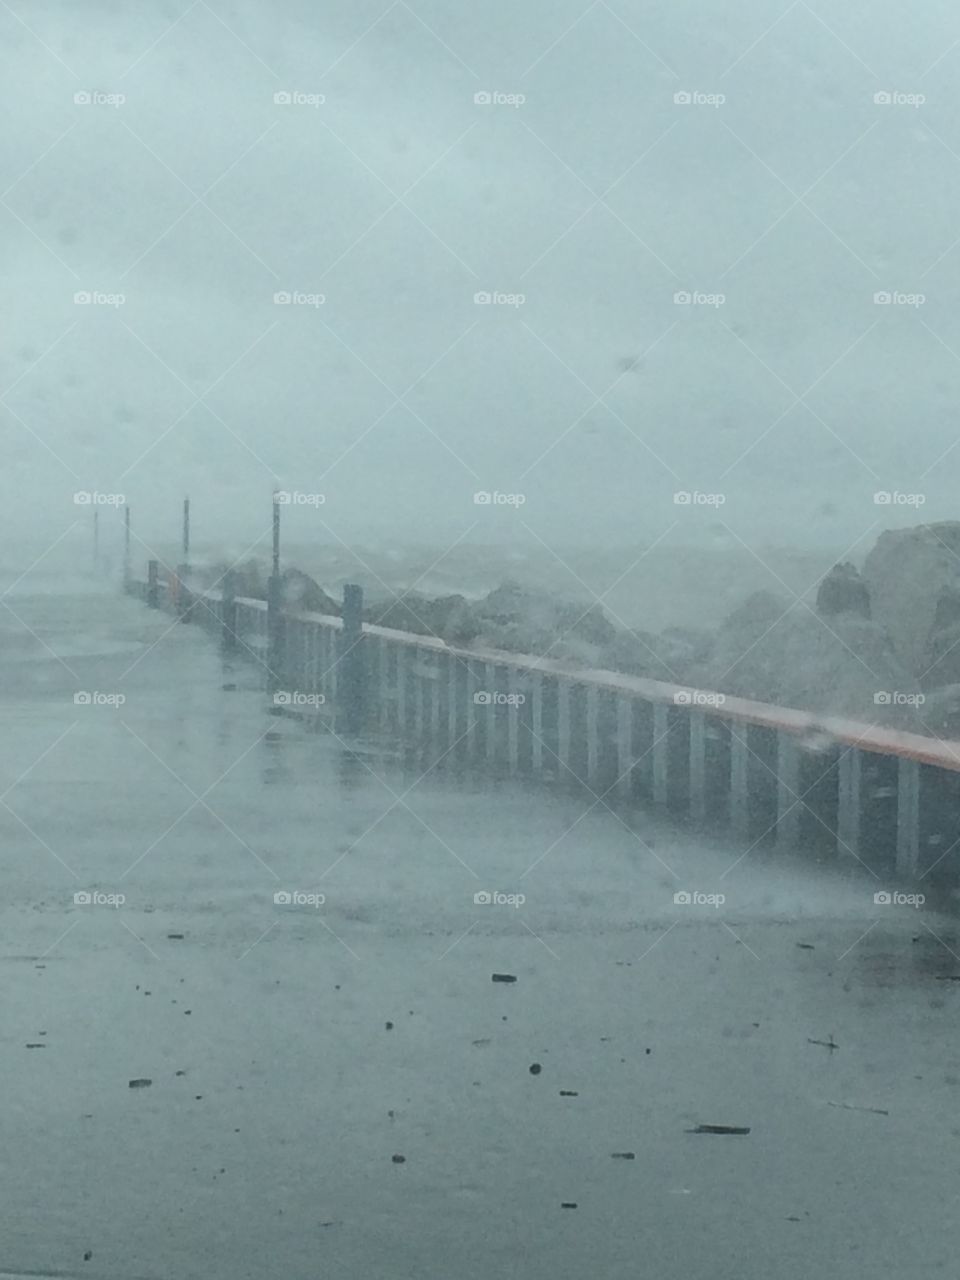 Erie storm hits pier. Storm of 2015 hits Lake Erie pier